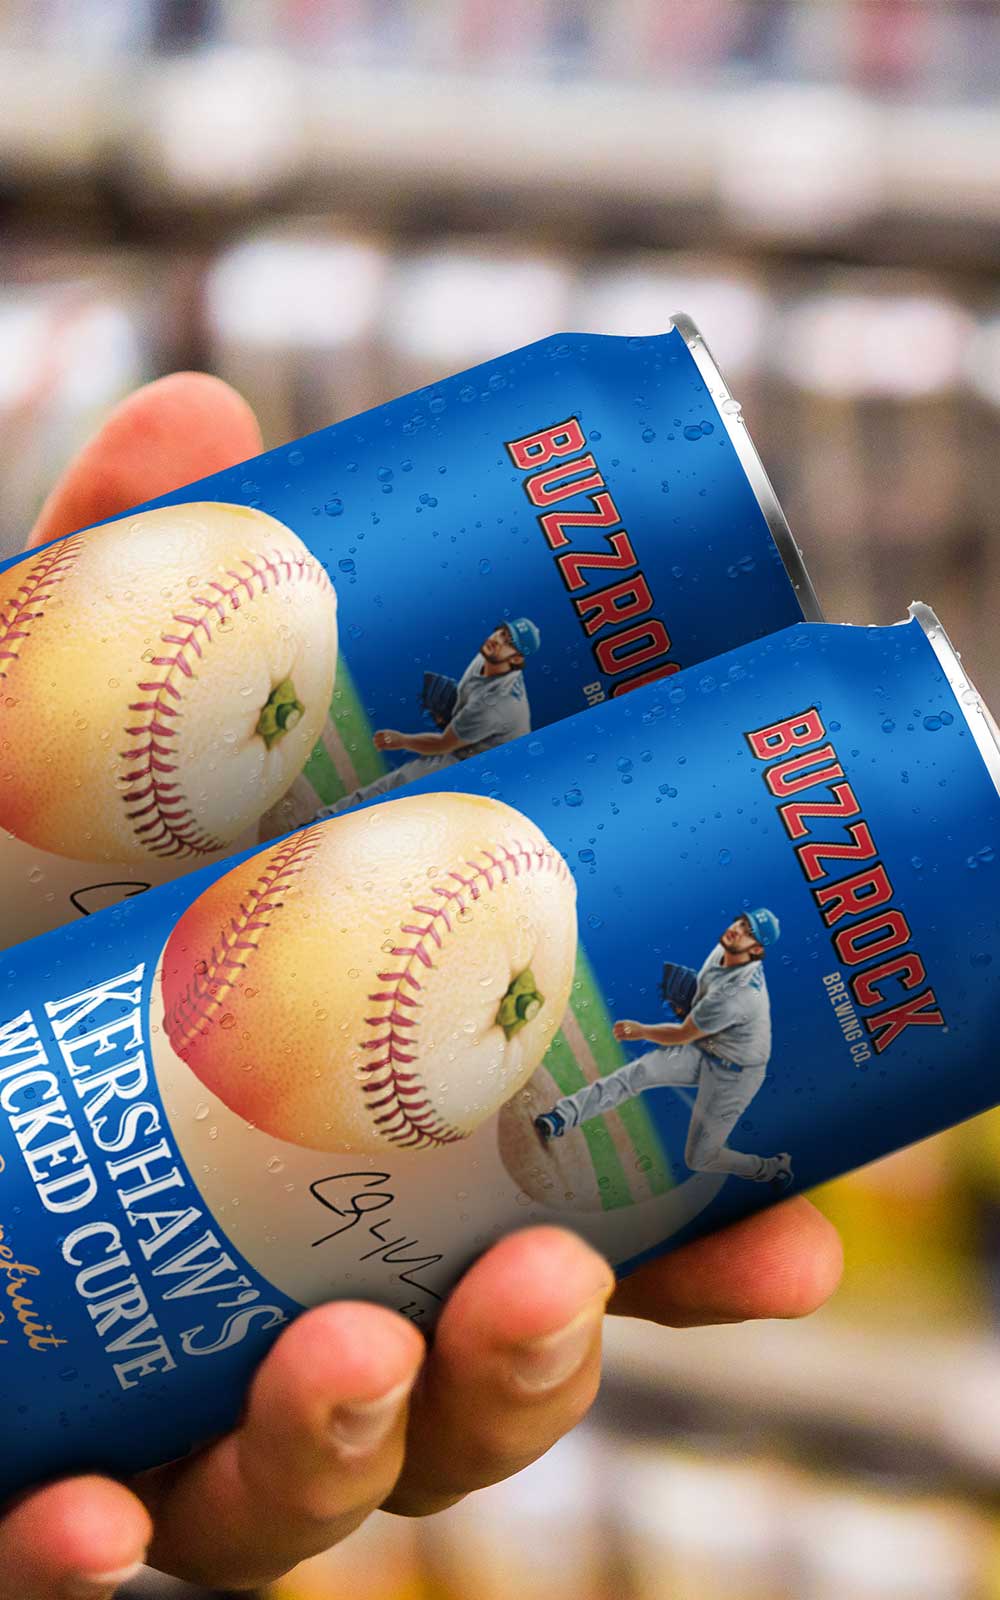 Kershaw's Wicked Curve Beer Cans